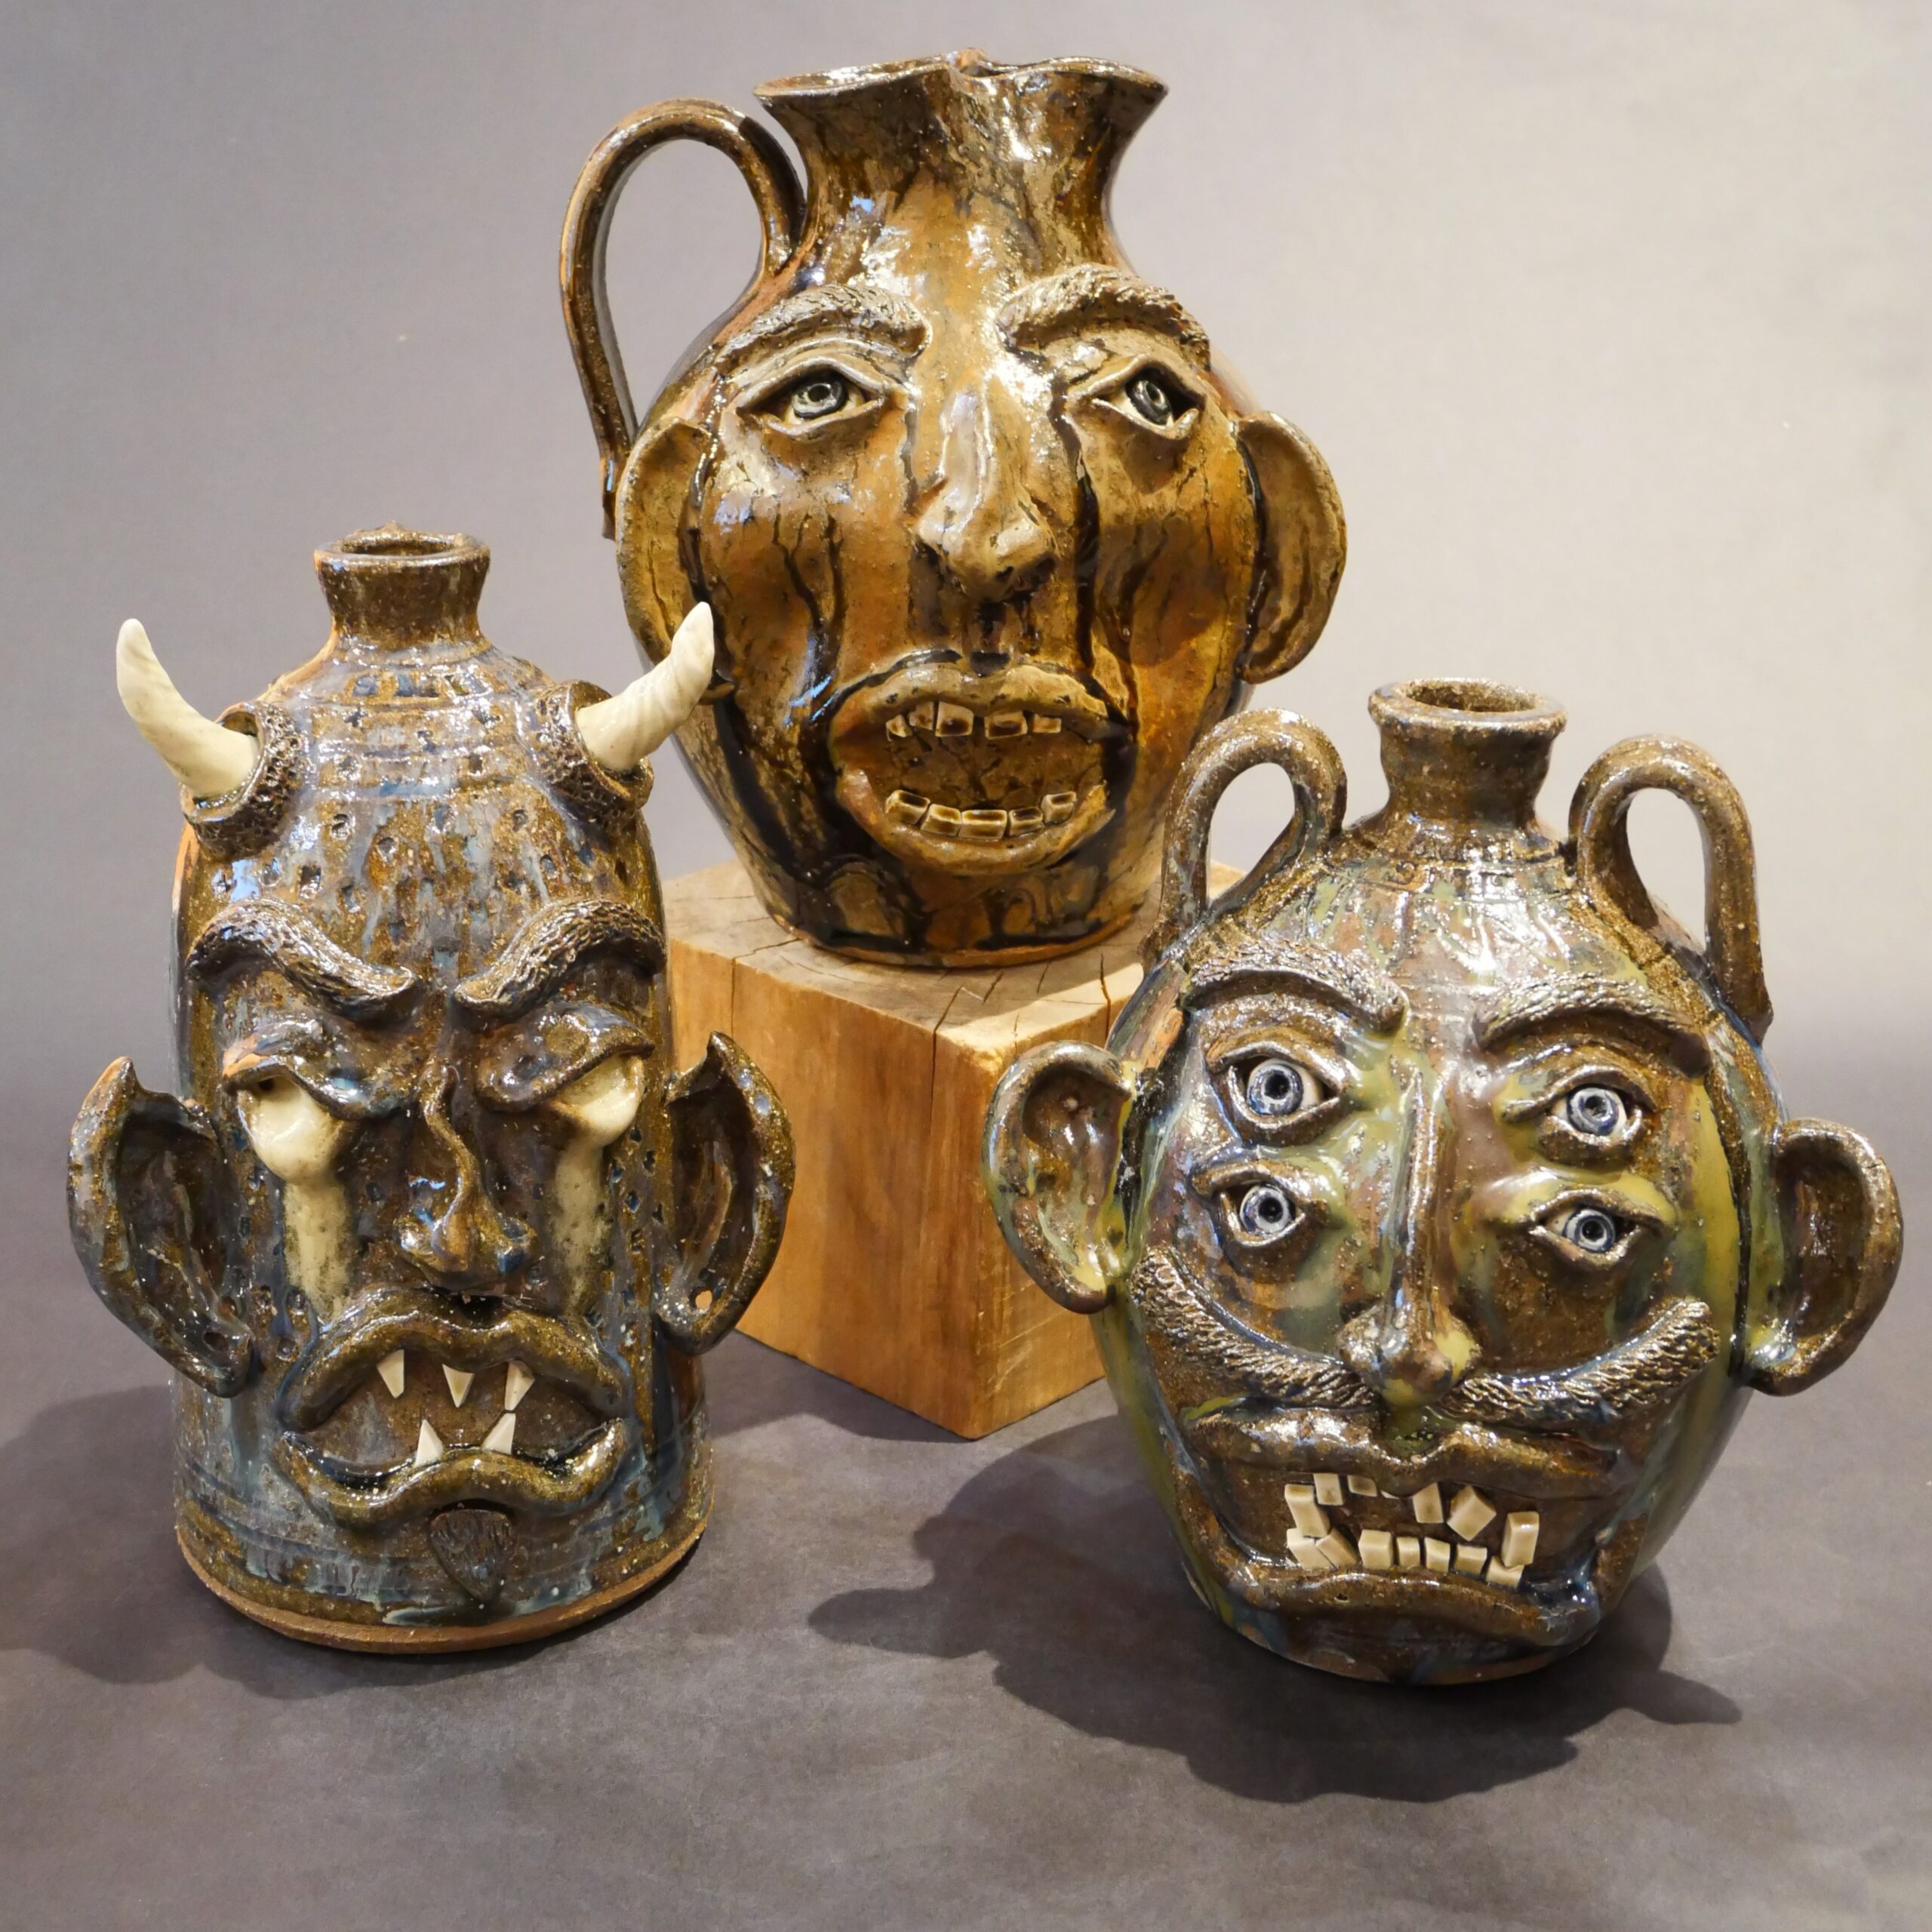 12th Annual Face Jug Show : NOW OPEN!